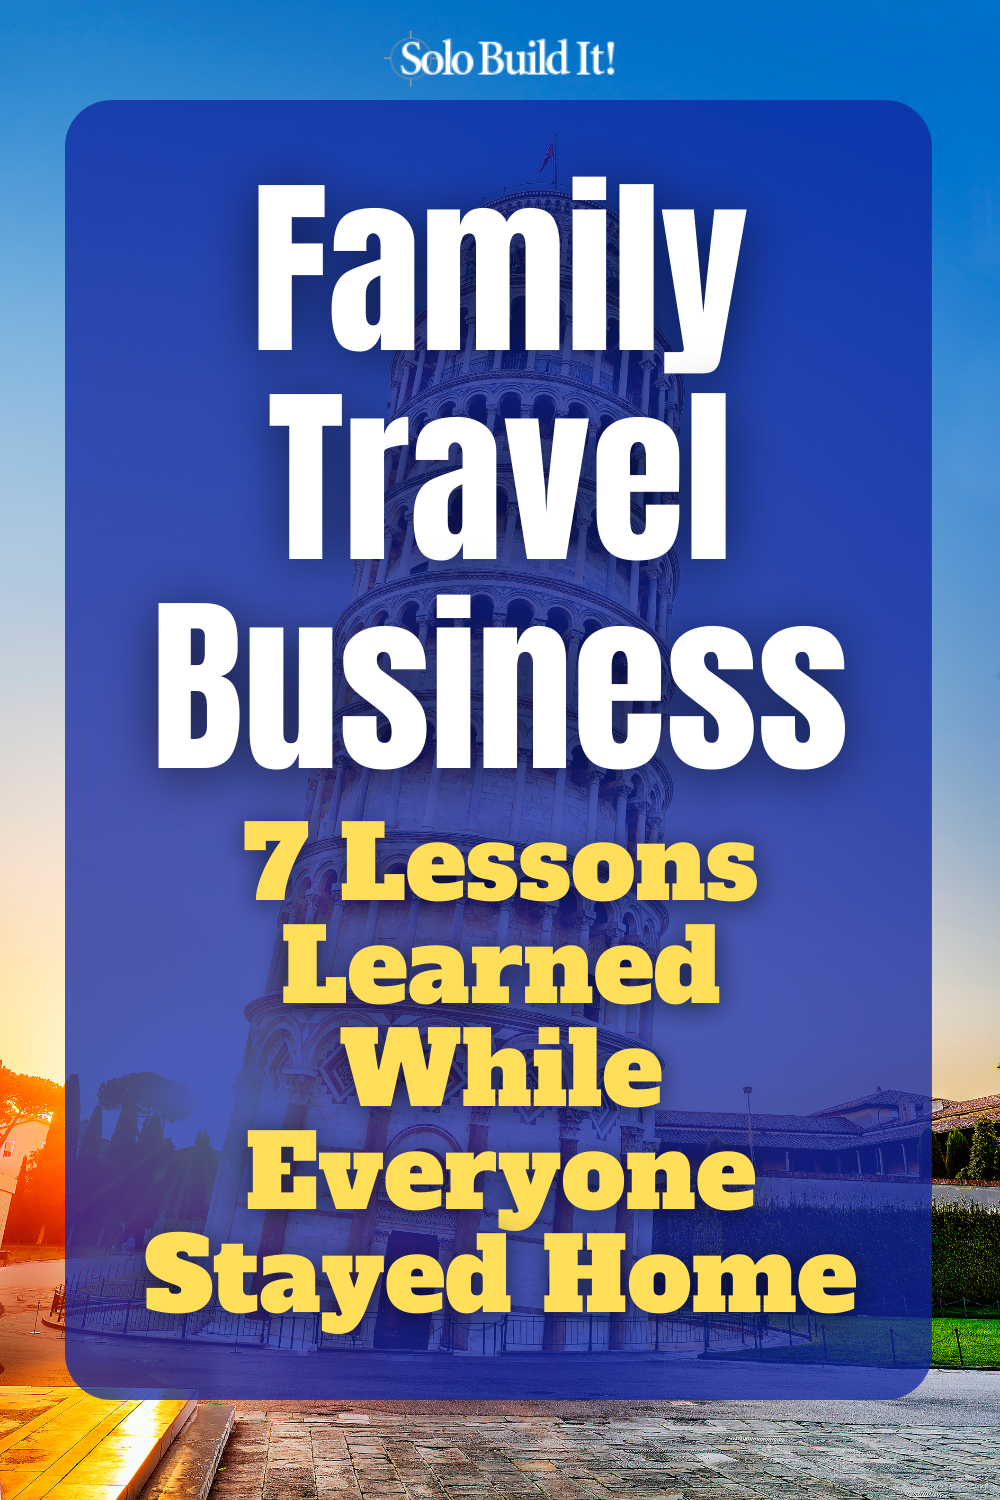 Family Travel Business: 7 Lessons Learned While Everyone Stayed Home